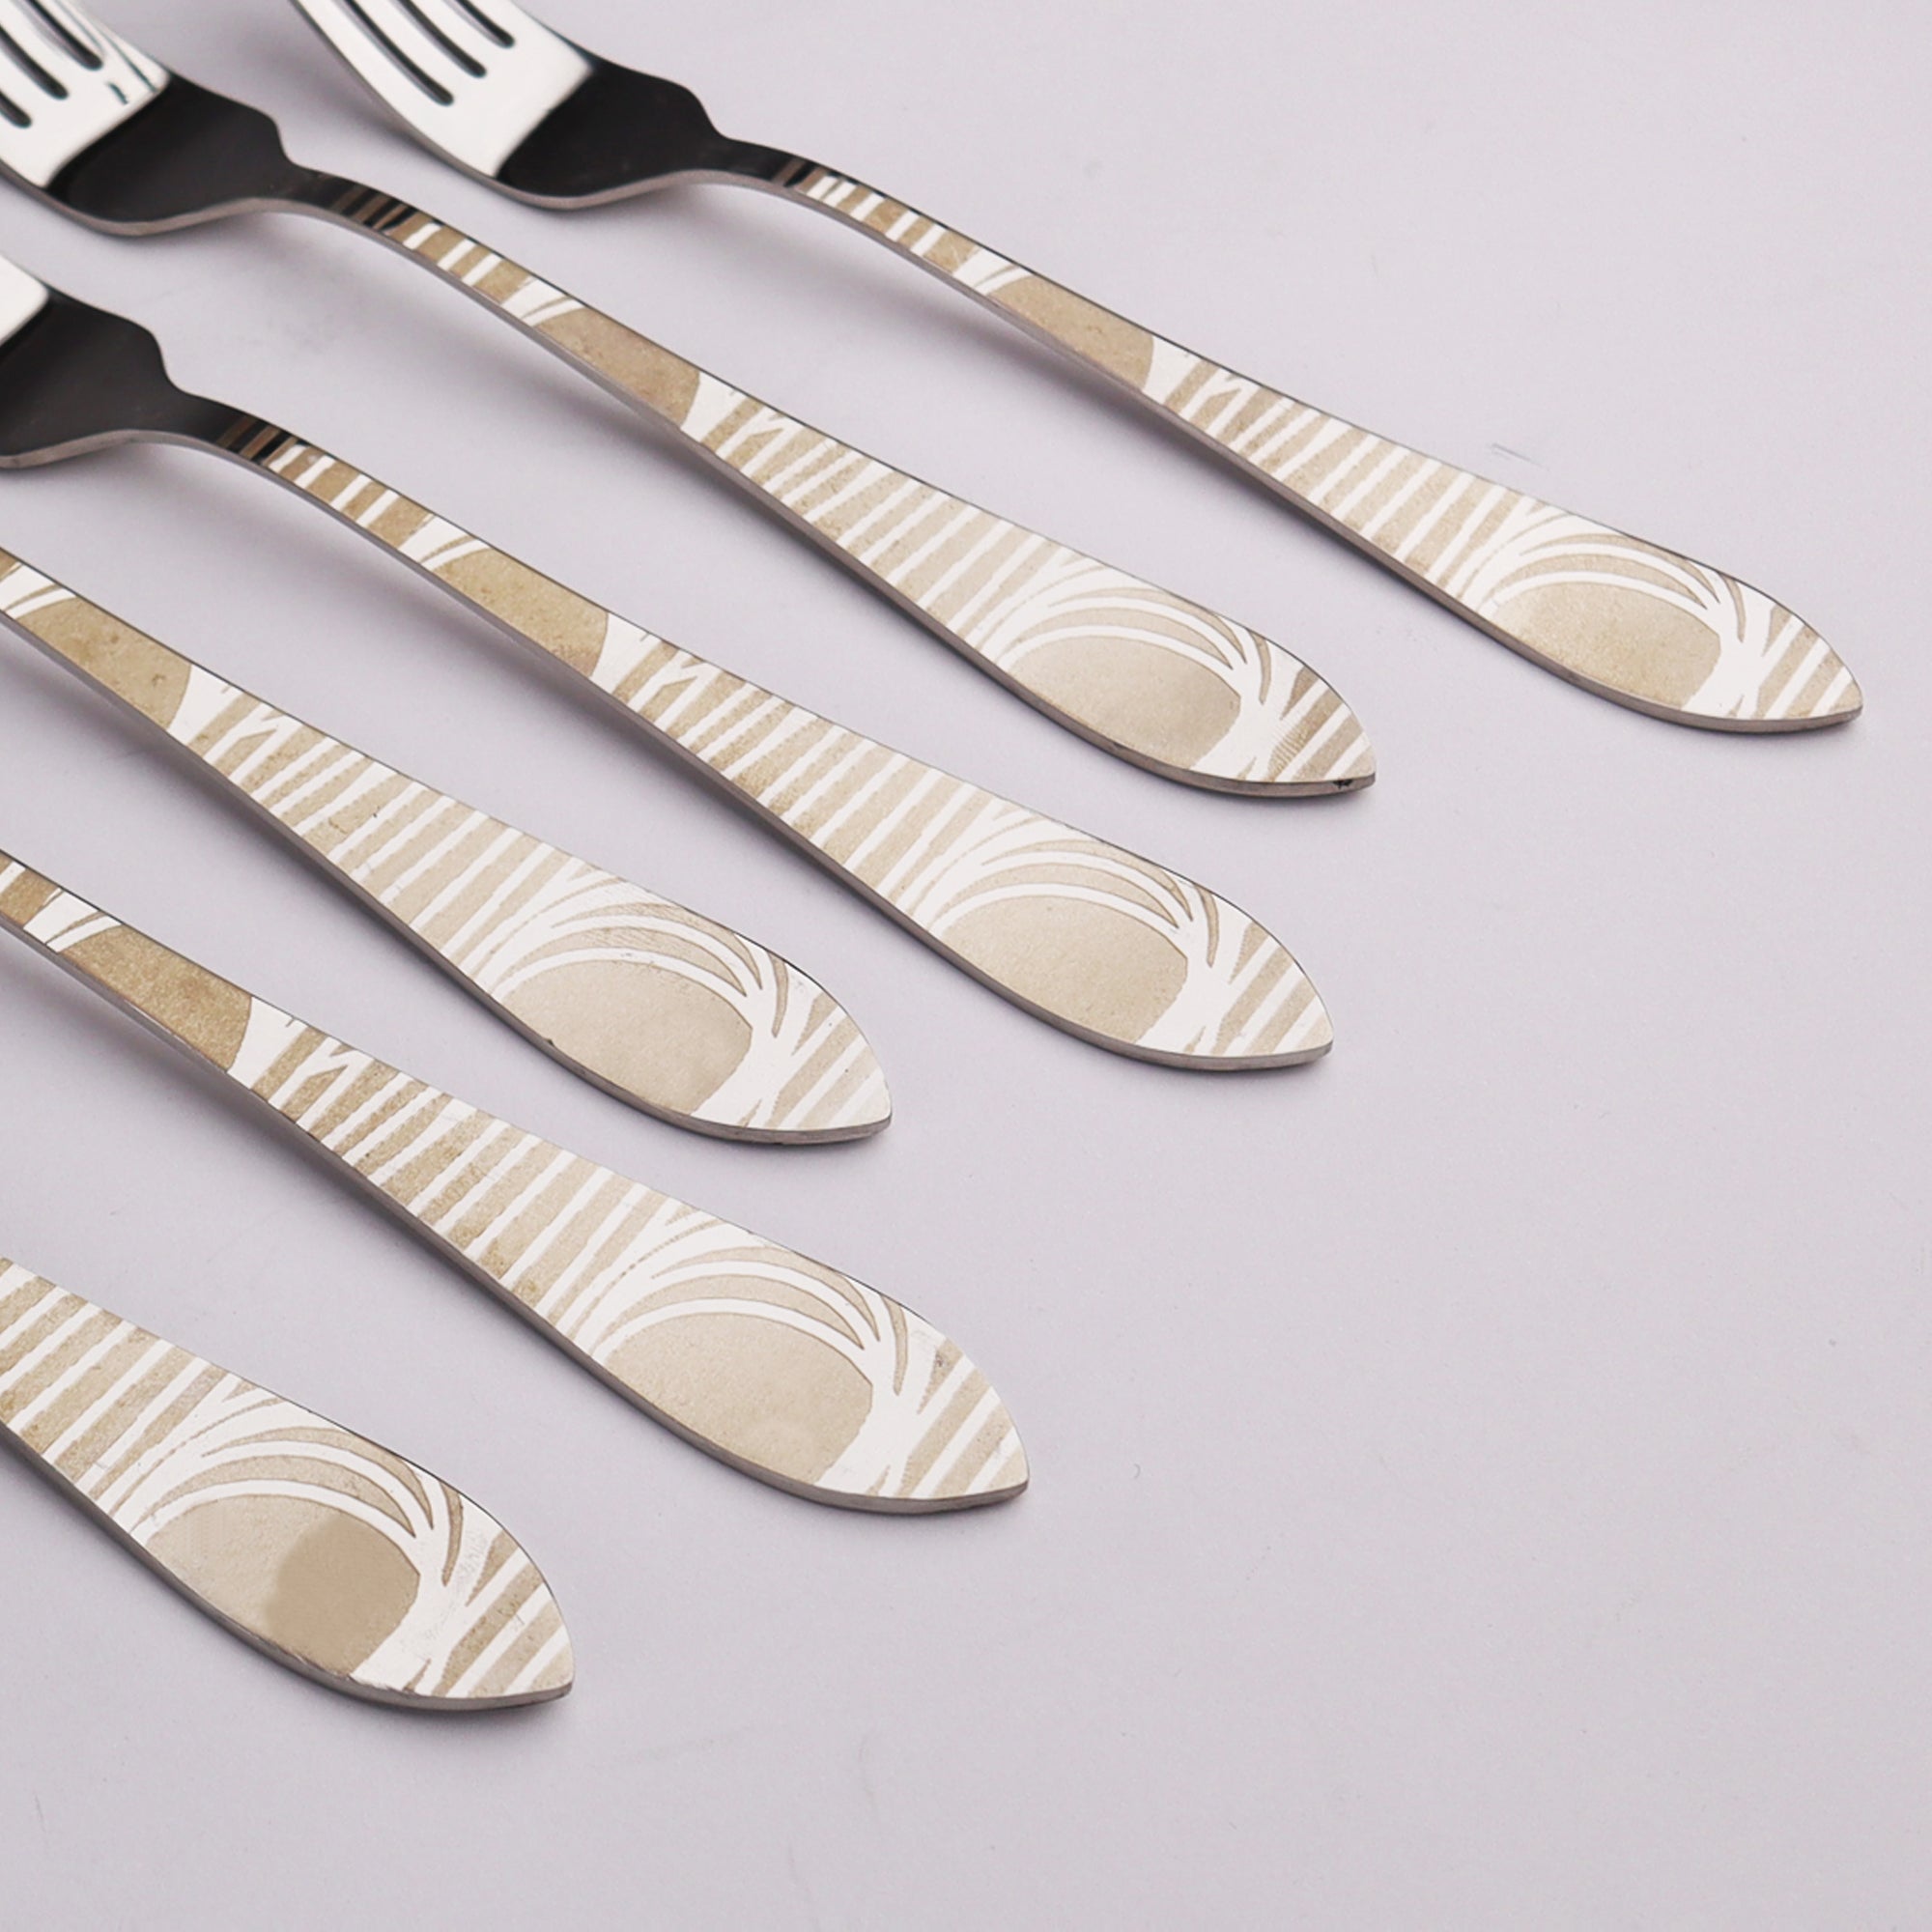 6 Pcs CHEF Nice Stainless Steel Table Fork Set 02- Kitchen Cutlery